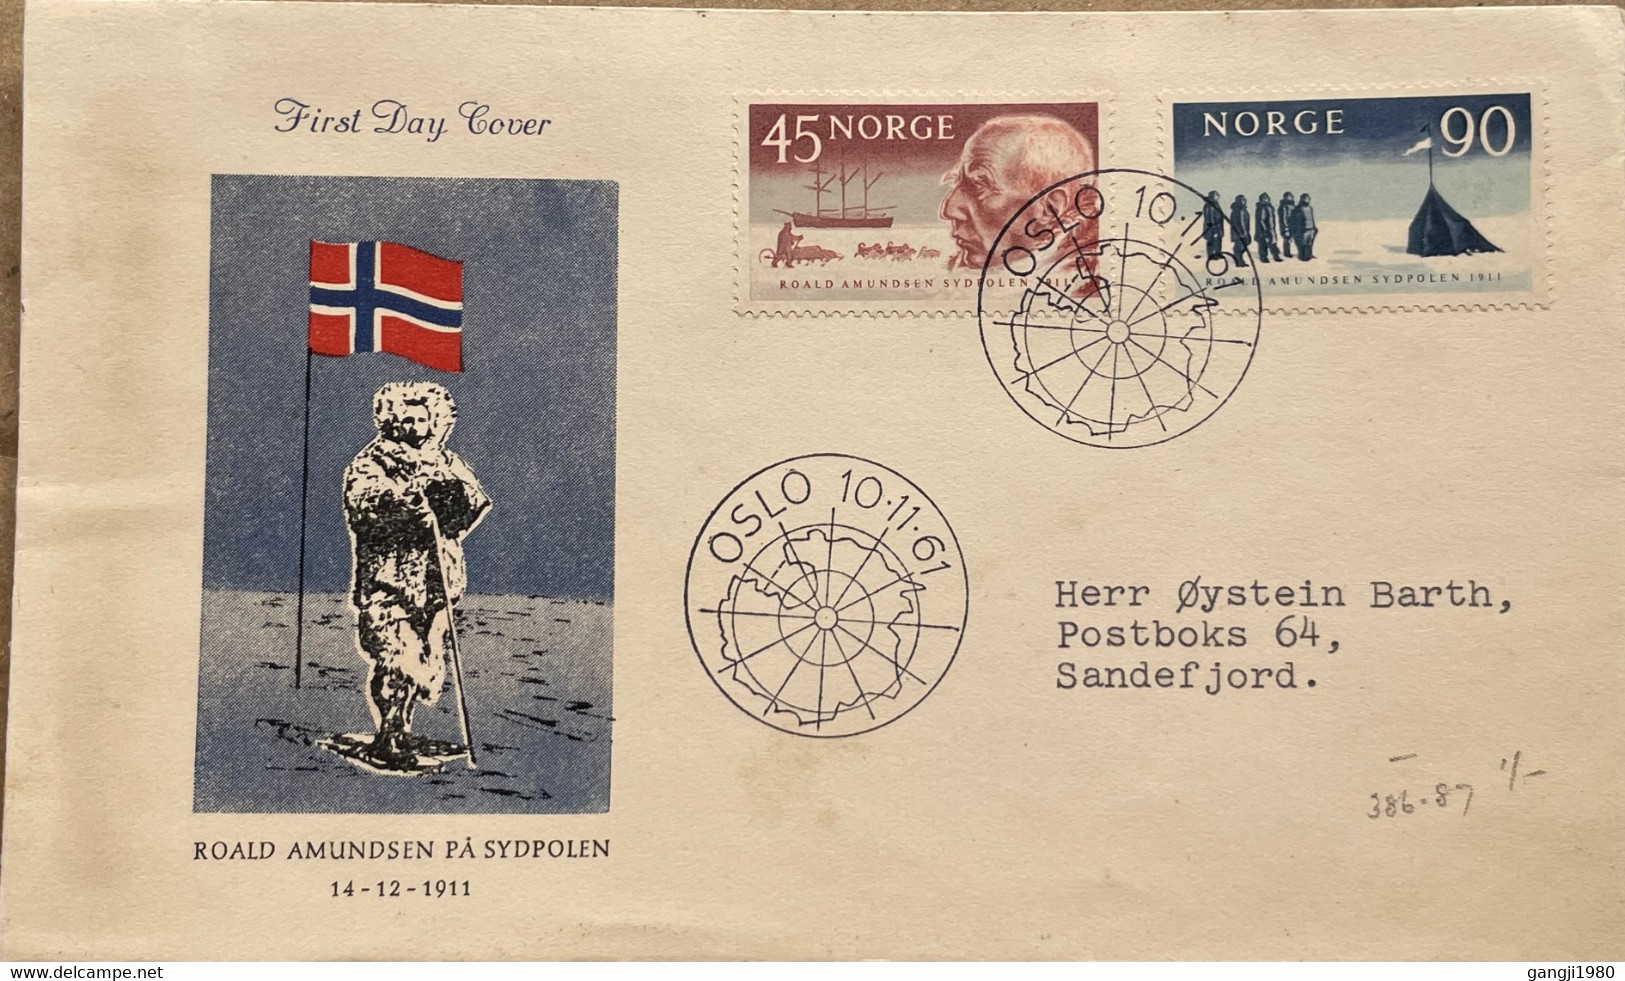 NORWAY 1961, FDC PRIVATE COVER, ILLUSTRATE FLAG, AMUNDSEN'S ARRIVAL AT SOUTH POLE, PARTY & TENT, 2 STAMP, OSLO CITY CANC - Covers & Documents